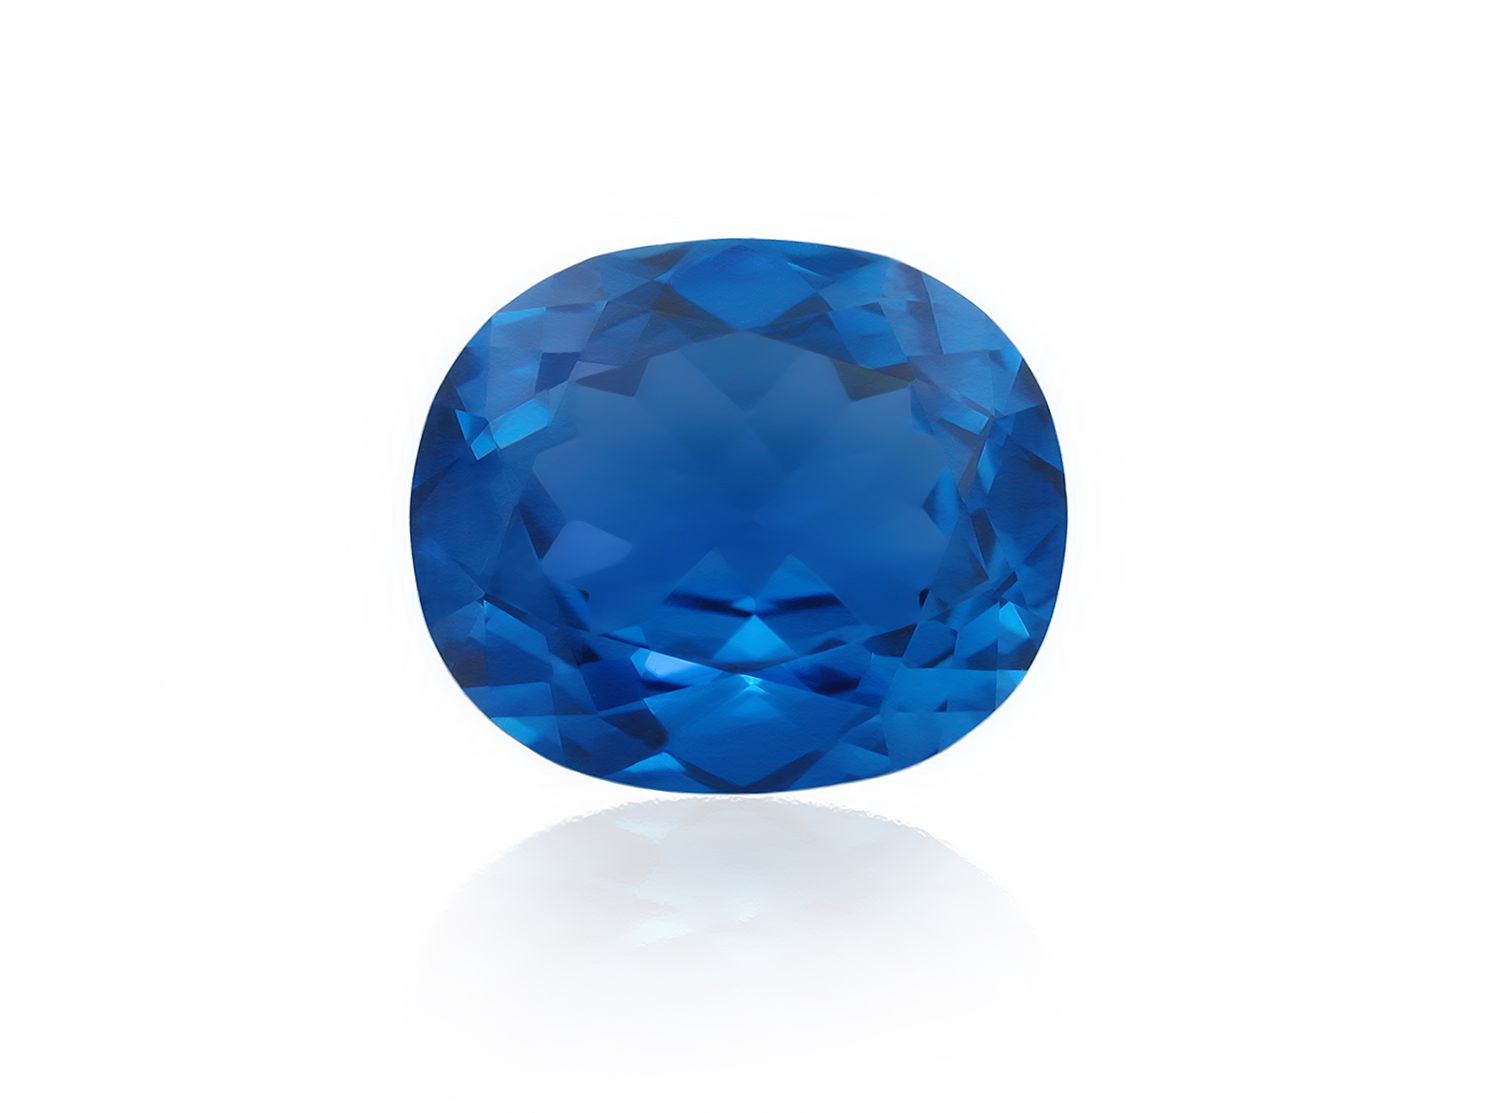 Blue sapphire on a white background